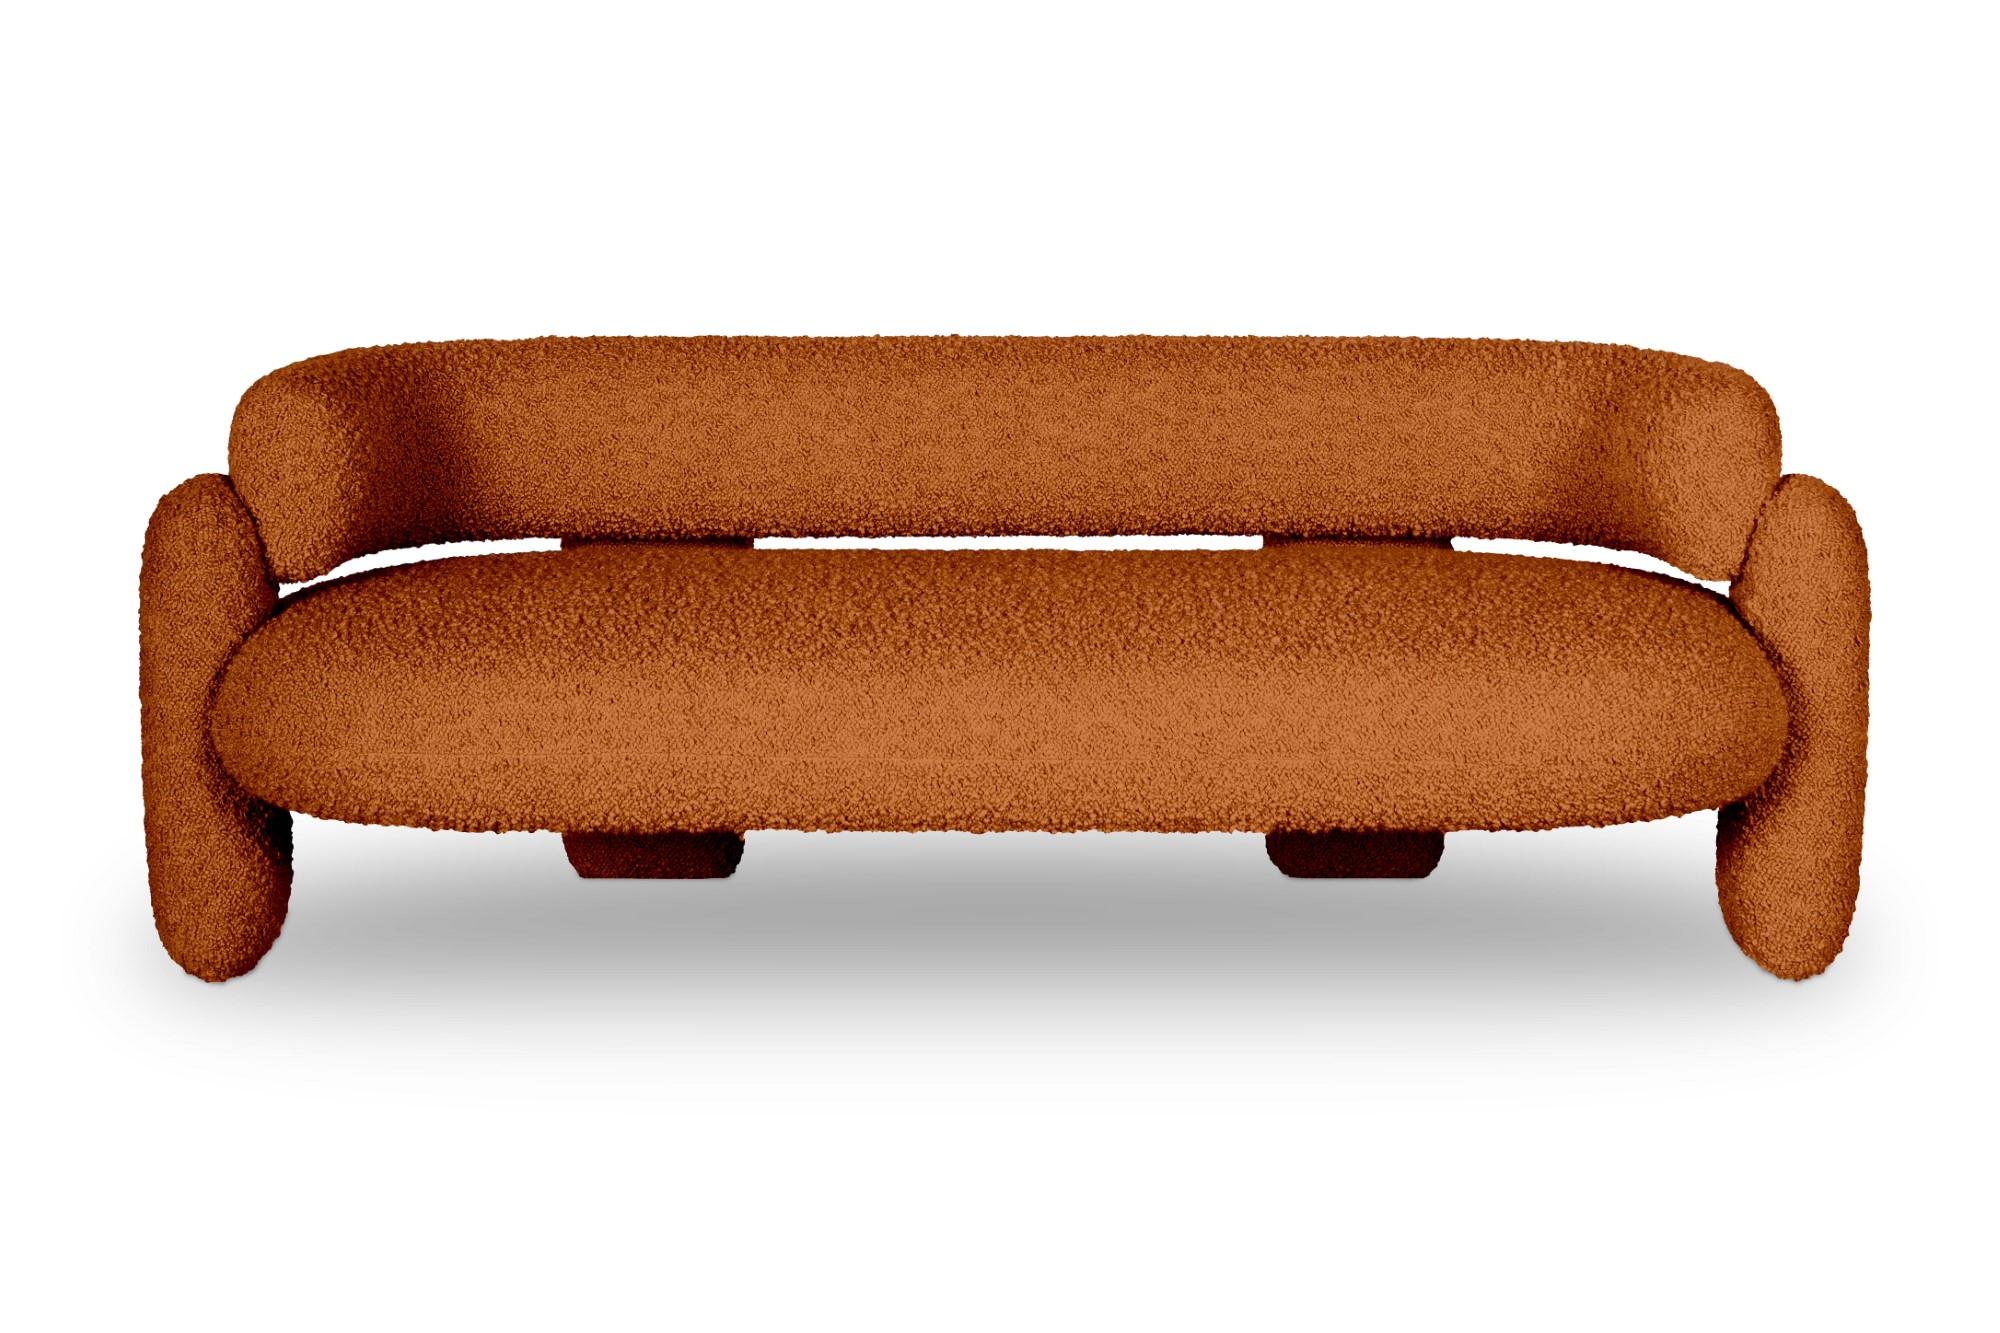 Embrace cormo persimmon sofa by Royal Stranger
Dimensions: W 200 x H 70 x D 90 cm. Seat Height 47 cm.
Materials: solid wood frame, foam, upholstery.
Available in other Royal Stranger’s fabrics and in COM.

Embrace Sofa is fond of neat lines. It